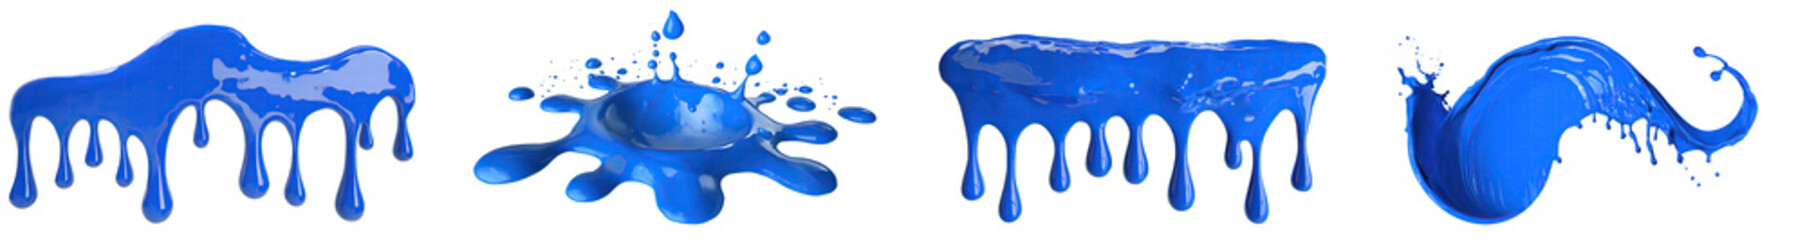 Collection of blue paint splashes, falling or melting with violet or dark blue drops and droplets,...